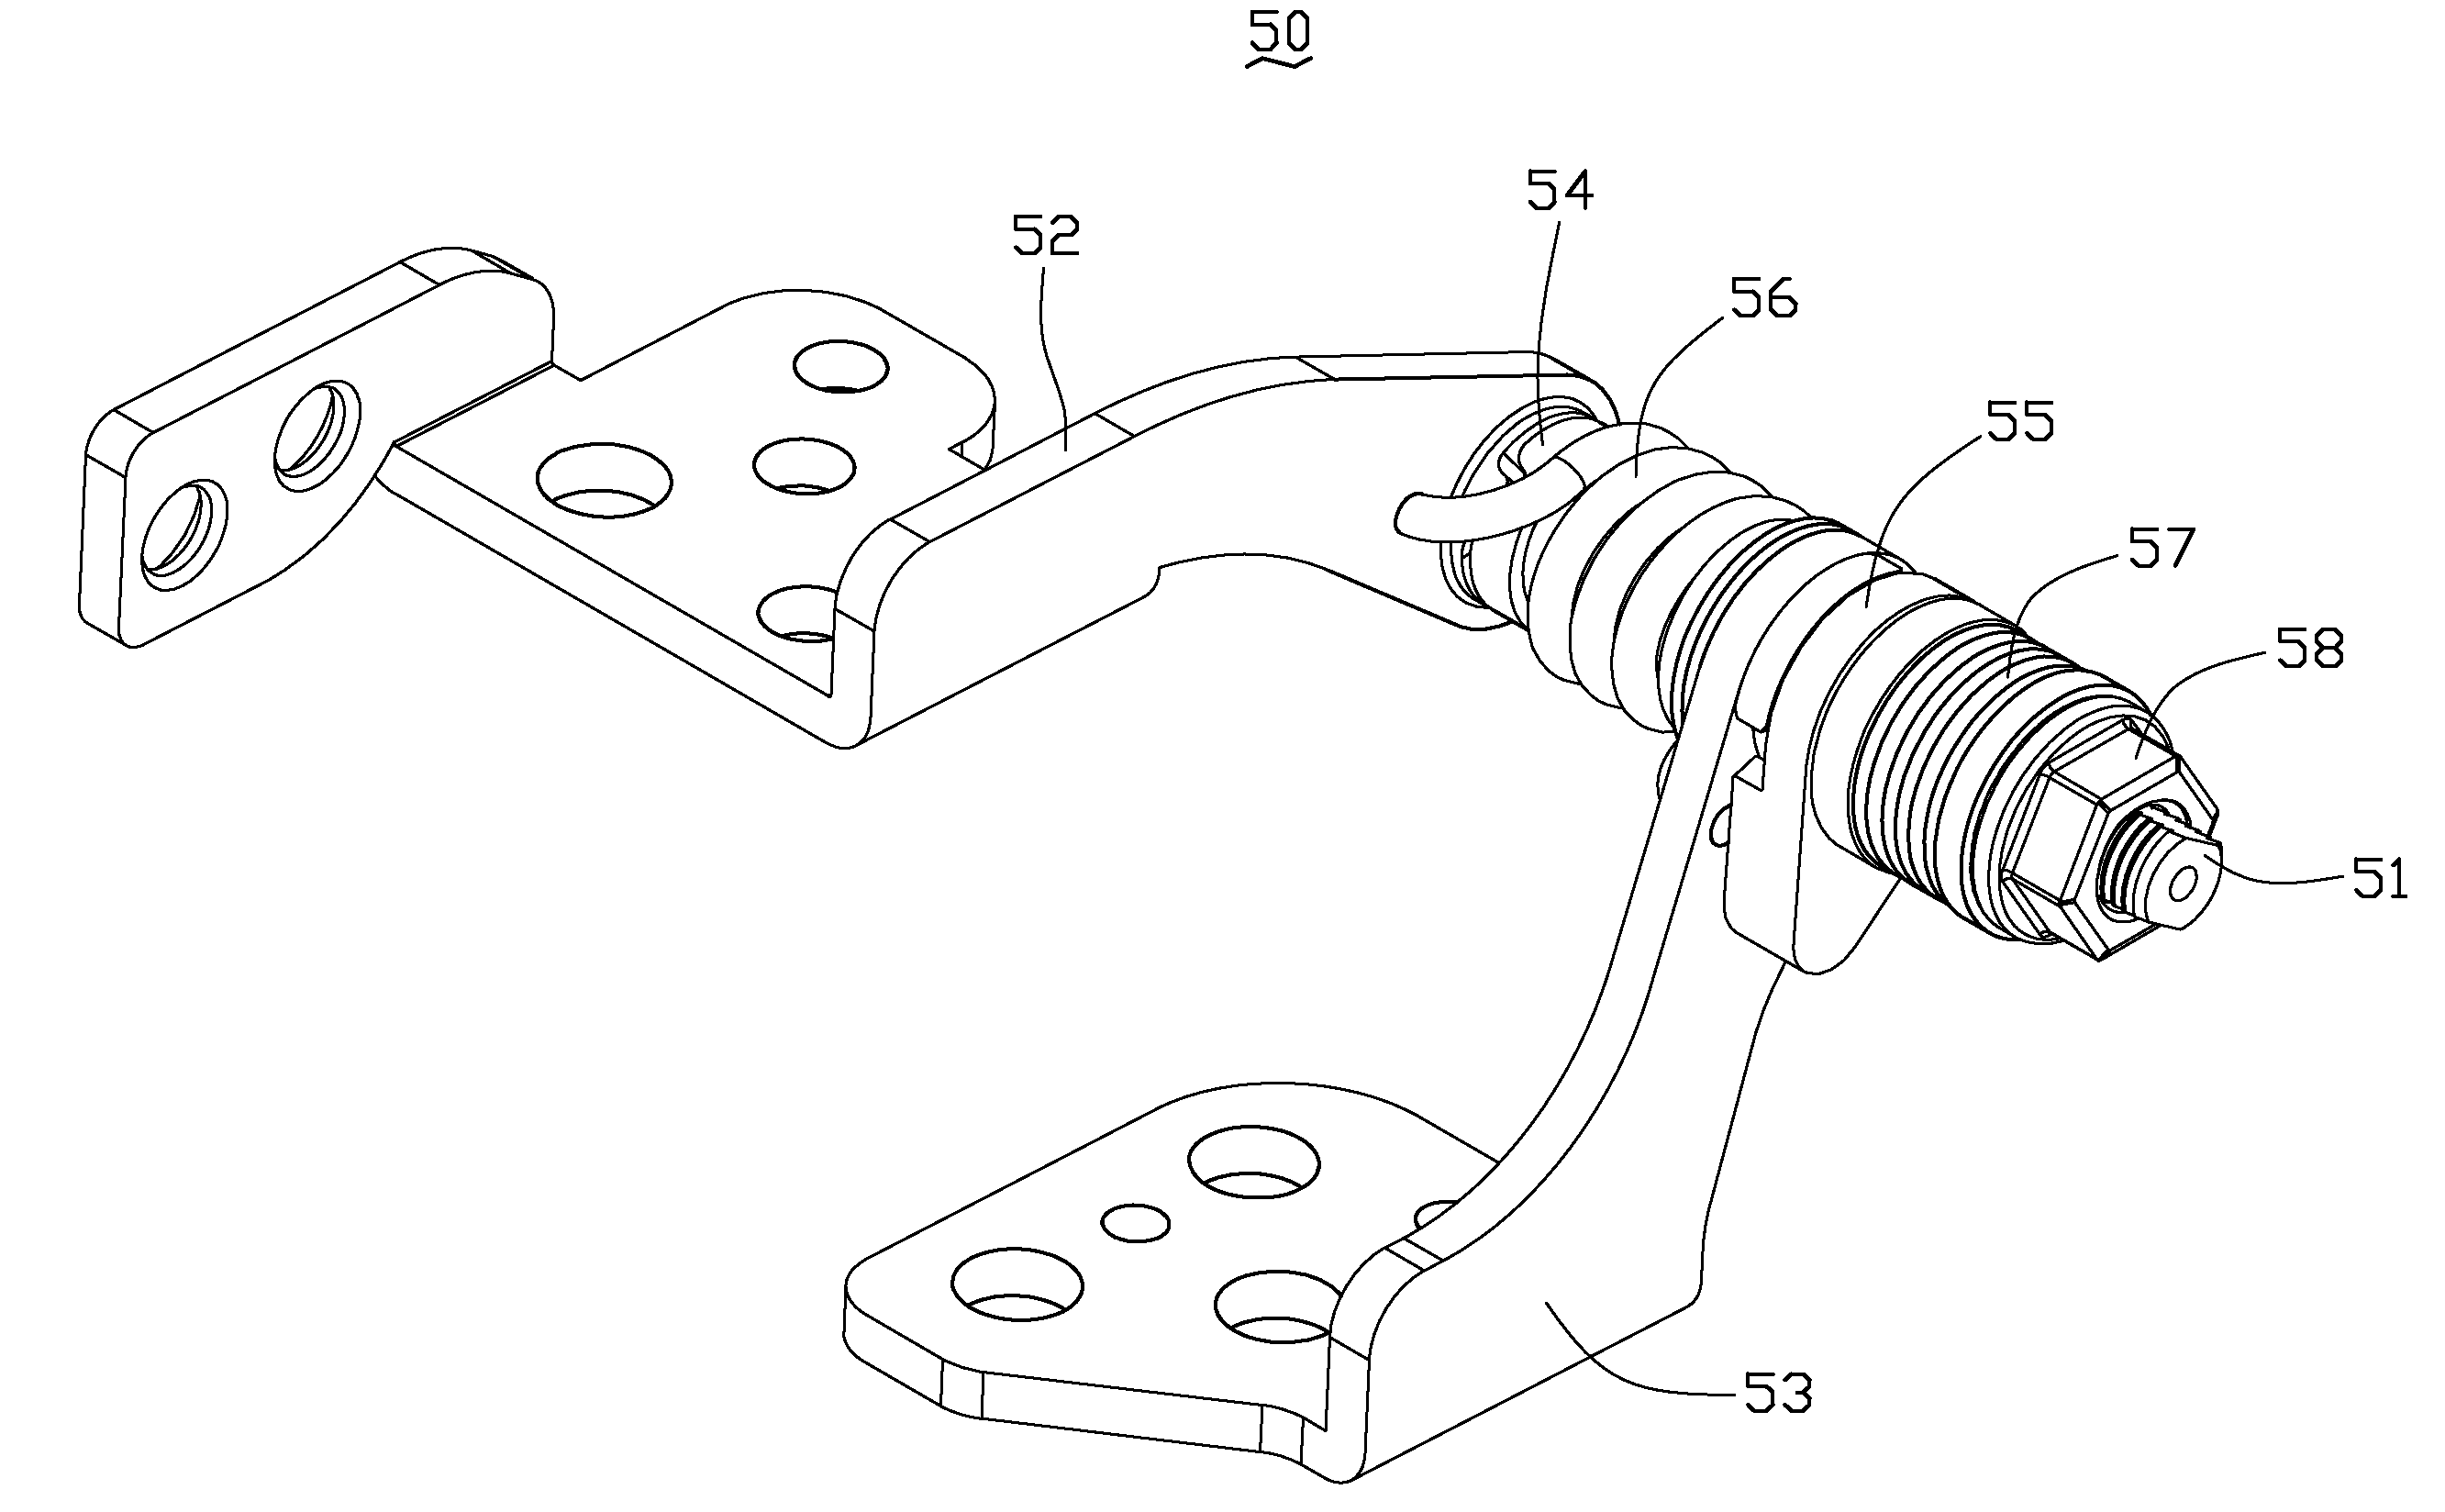 Hinge assembly and eletronic device using the same